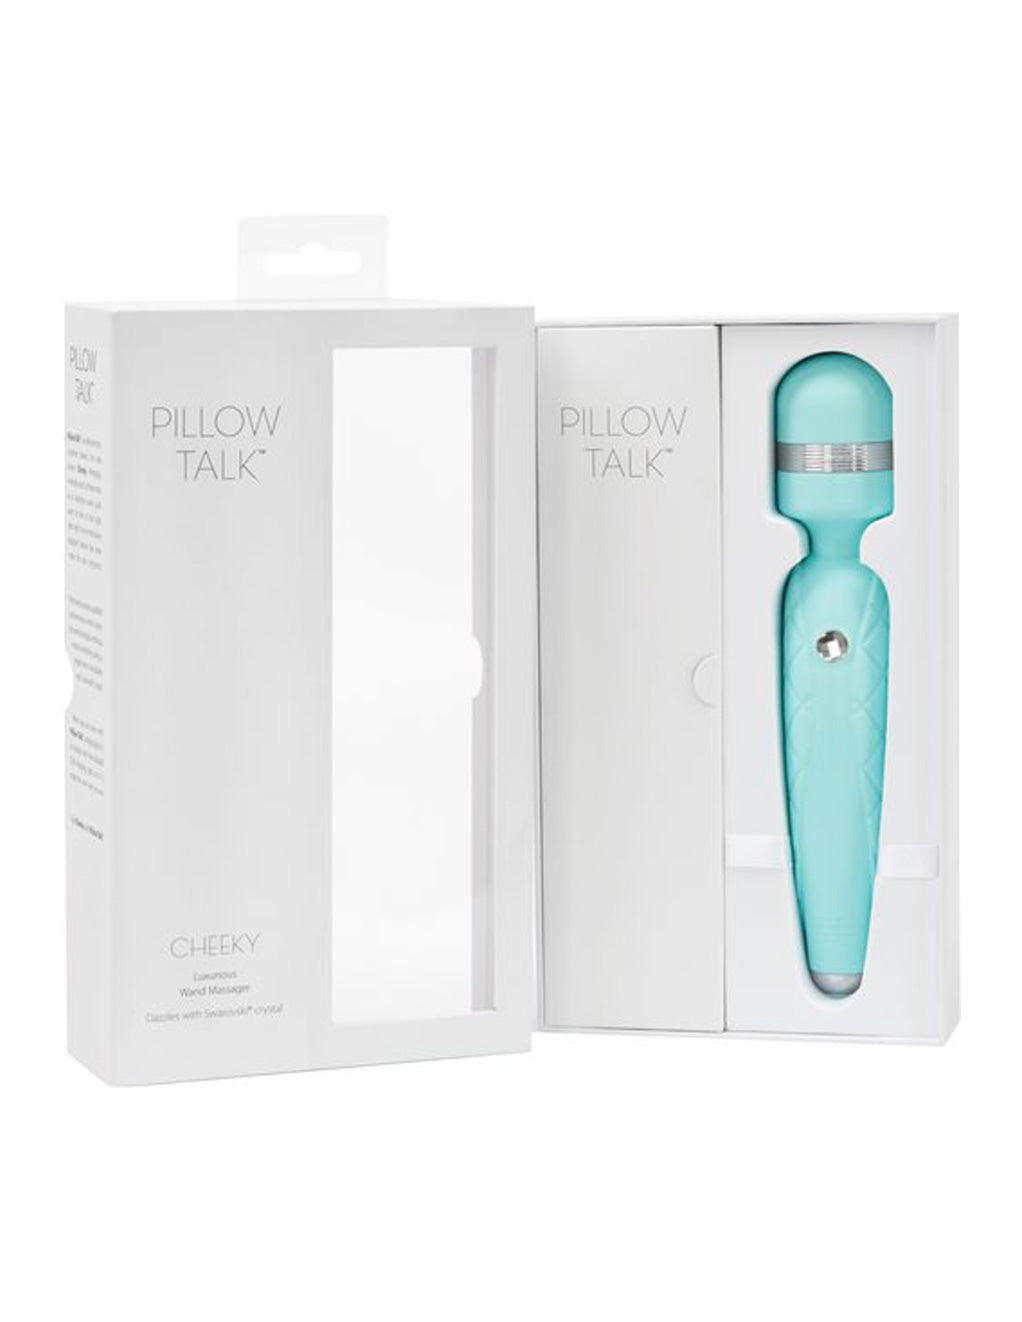 Pillow Talk Cheeky by BMS Factory Teal Box